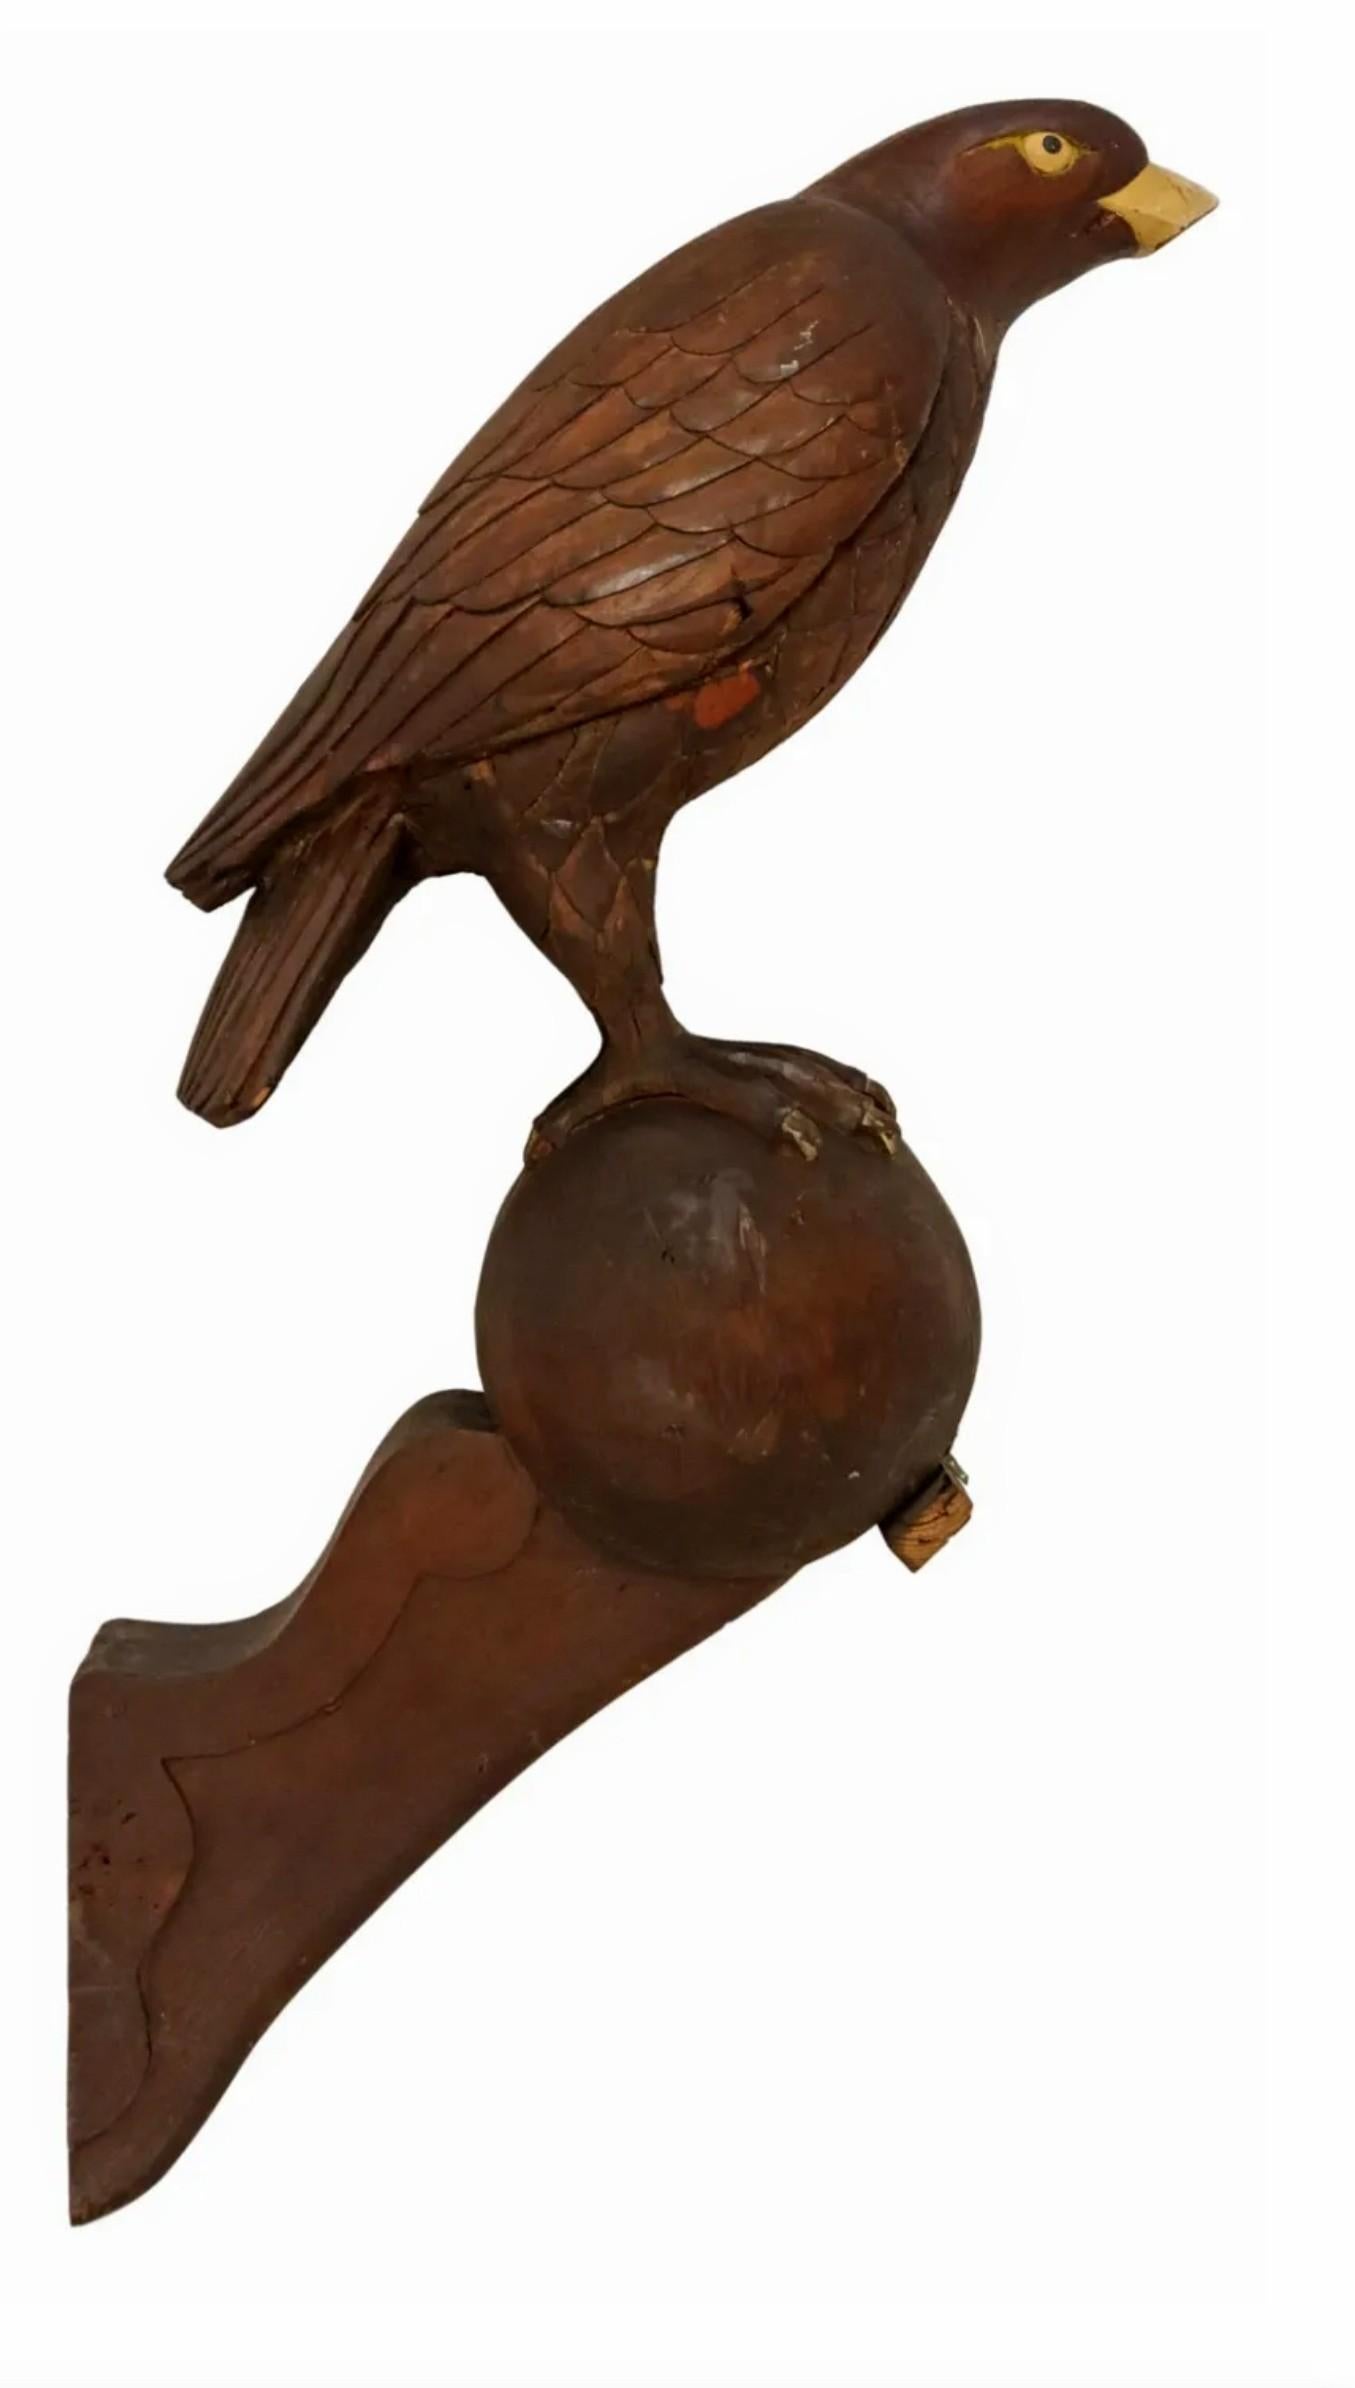 Monumental Antique Architectural Wood Carving Perched Eagle Bird In Good Condition For Sale In Forney, TX